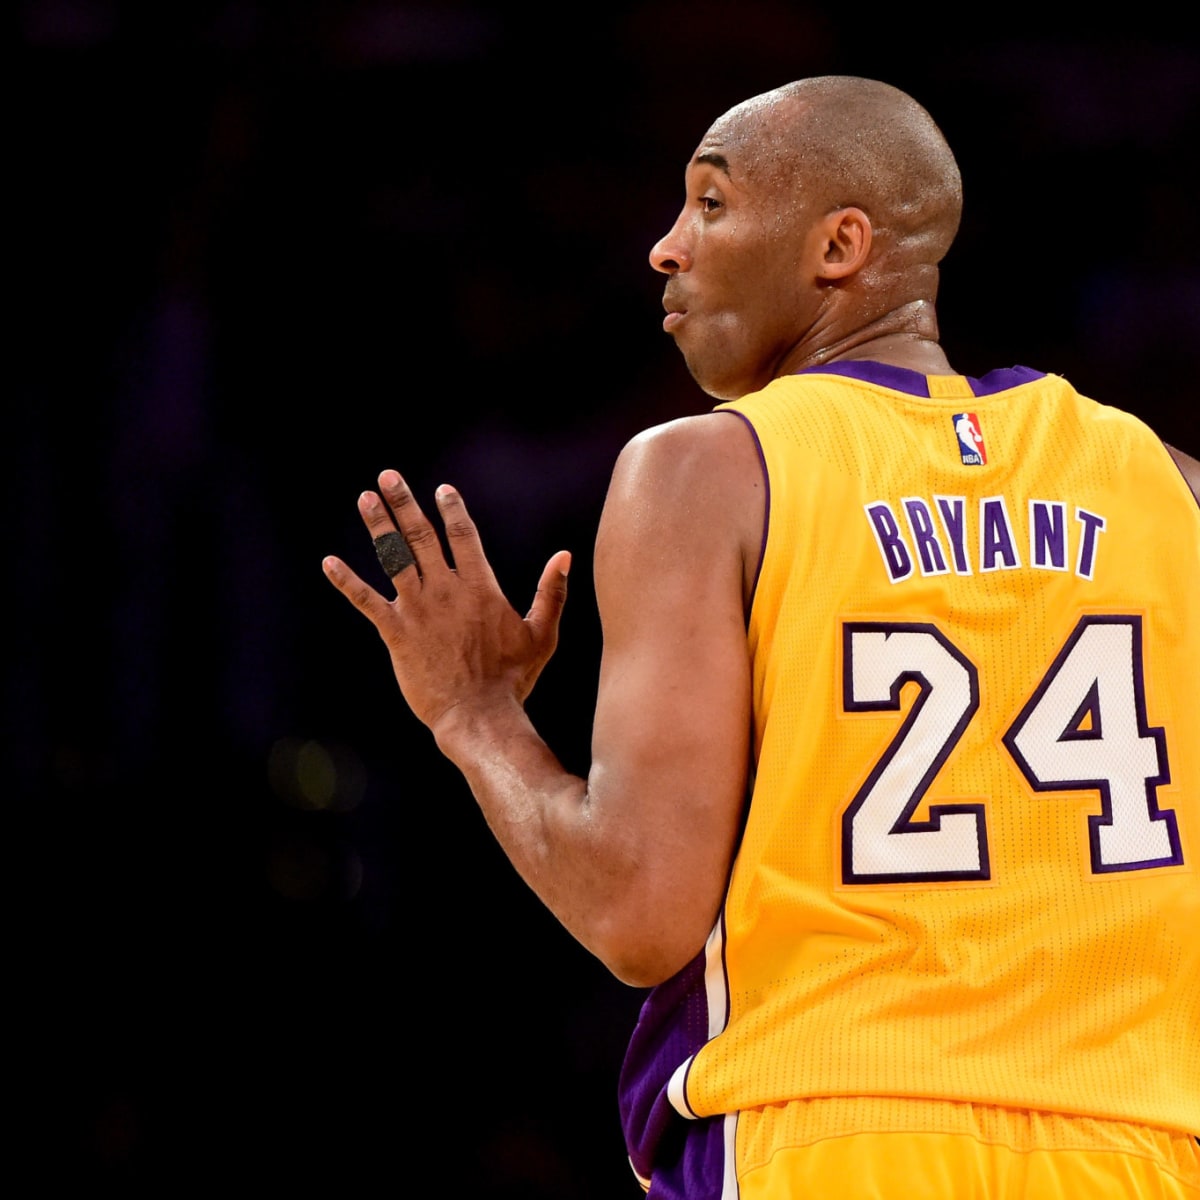 Should the Lakers retire Kobe Bryant as No. 8 or No. 24? They